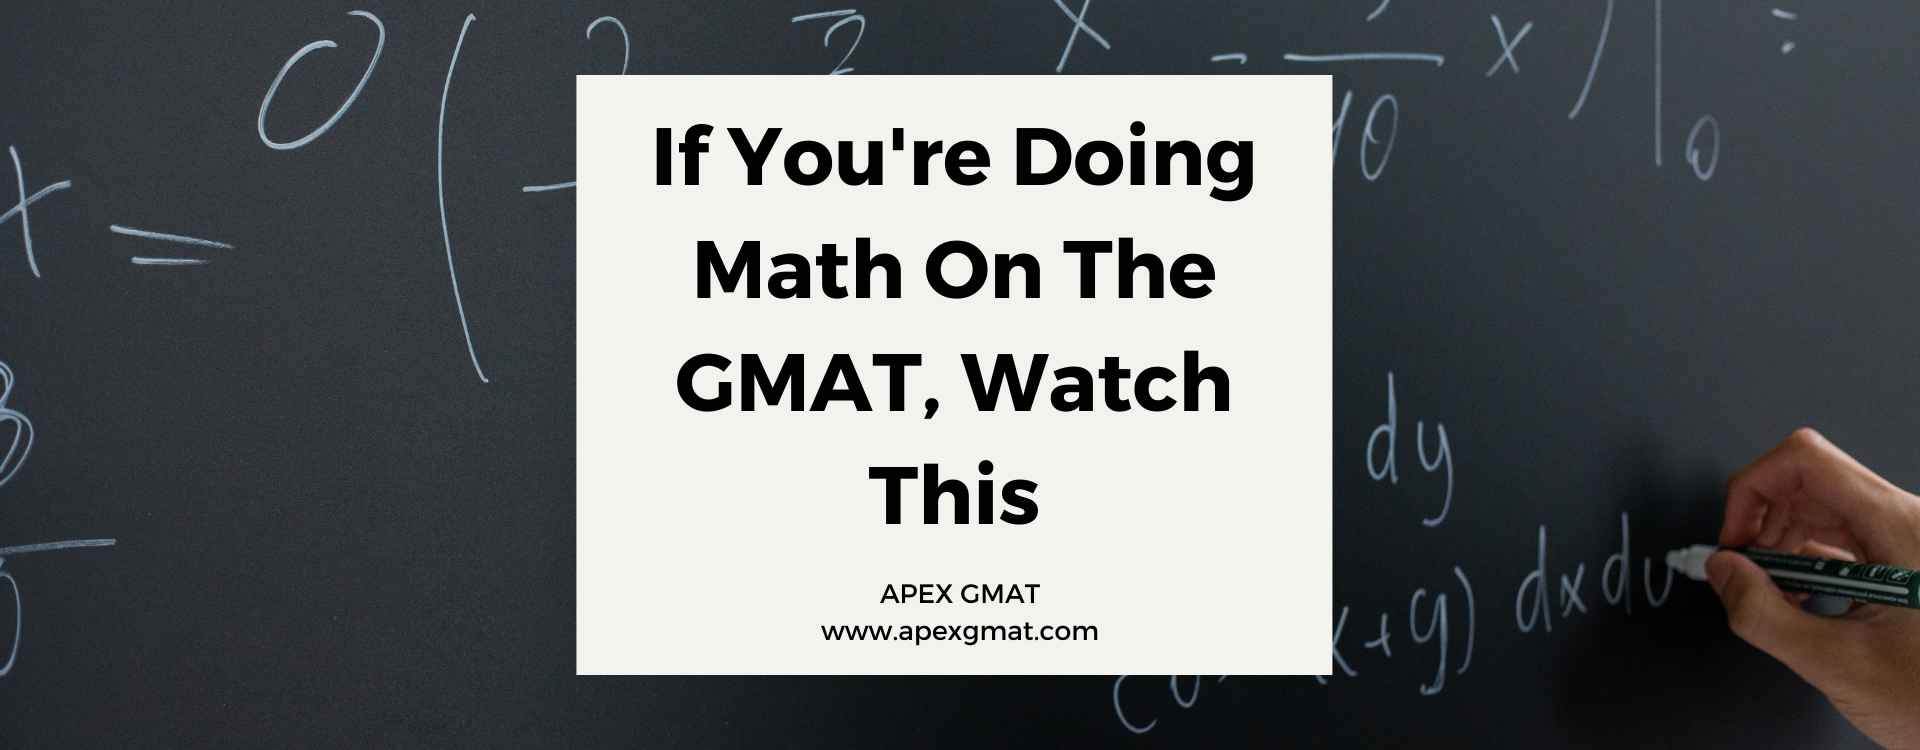 If You’re Doing Math On The GMAT, Watch This!